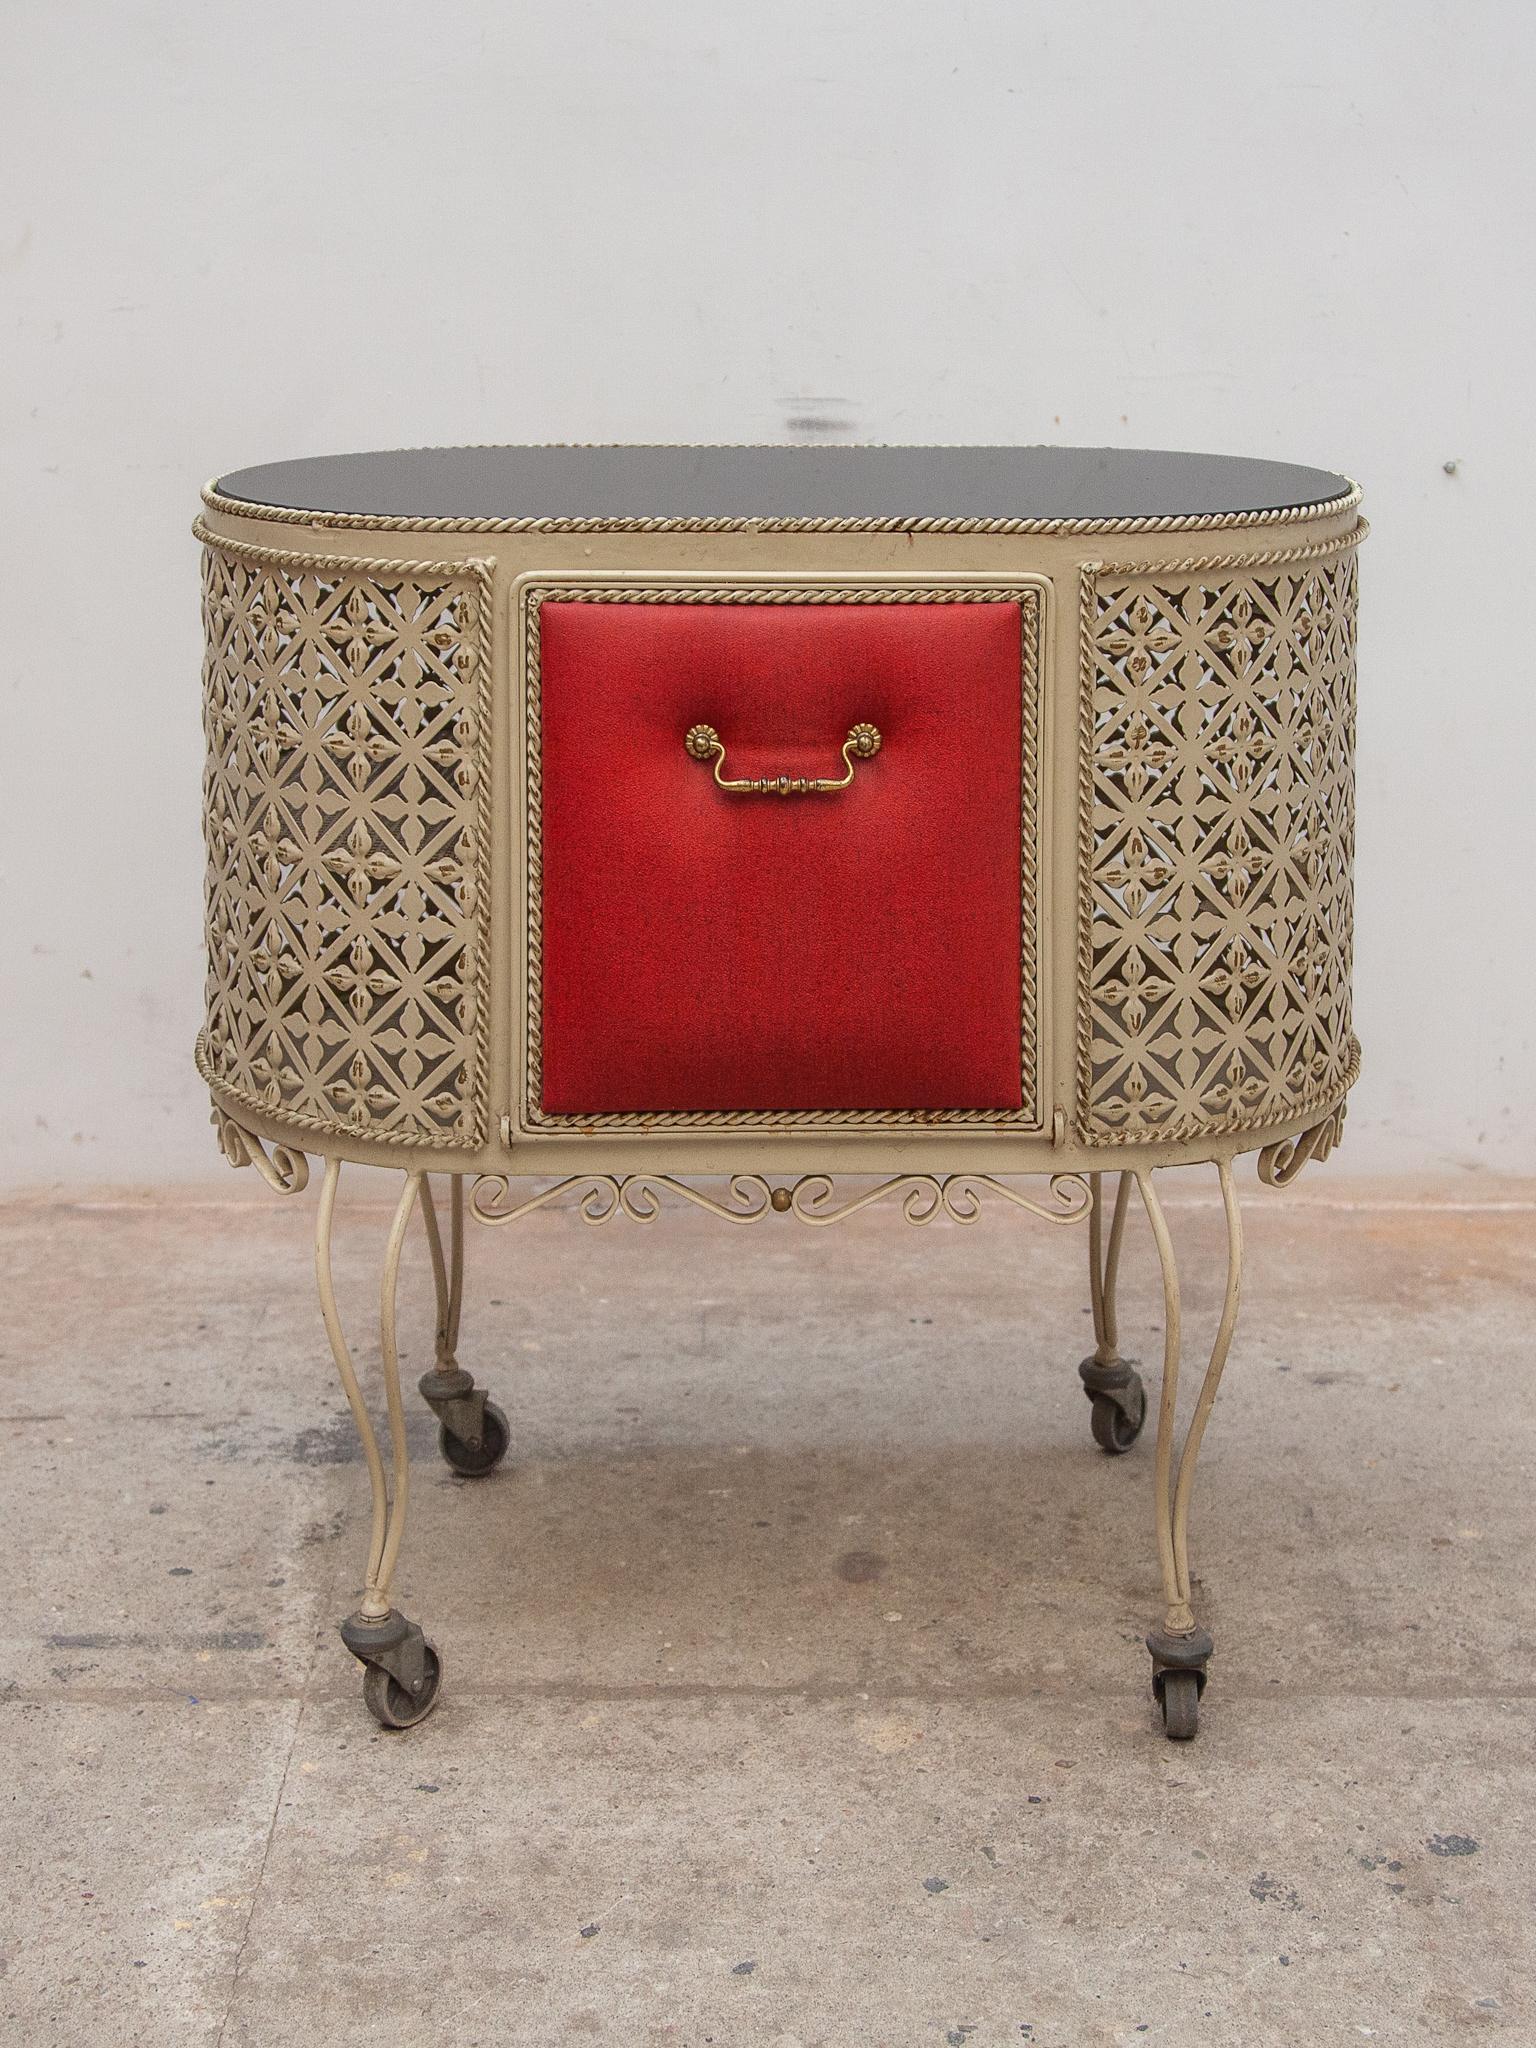 Rare vintage French oval perforated bar cart, trolley or drinks cart in the style of Mathieu Mategot, 1950s, consists of perforated white coated metal with a black glass top and the door covered with a red faux leather accent. In original, good